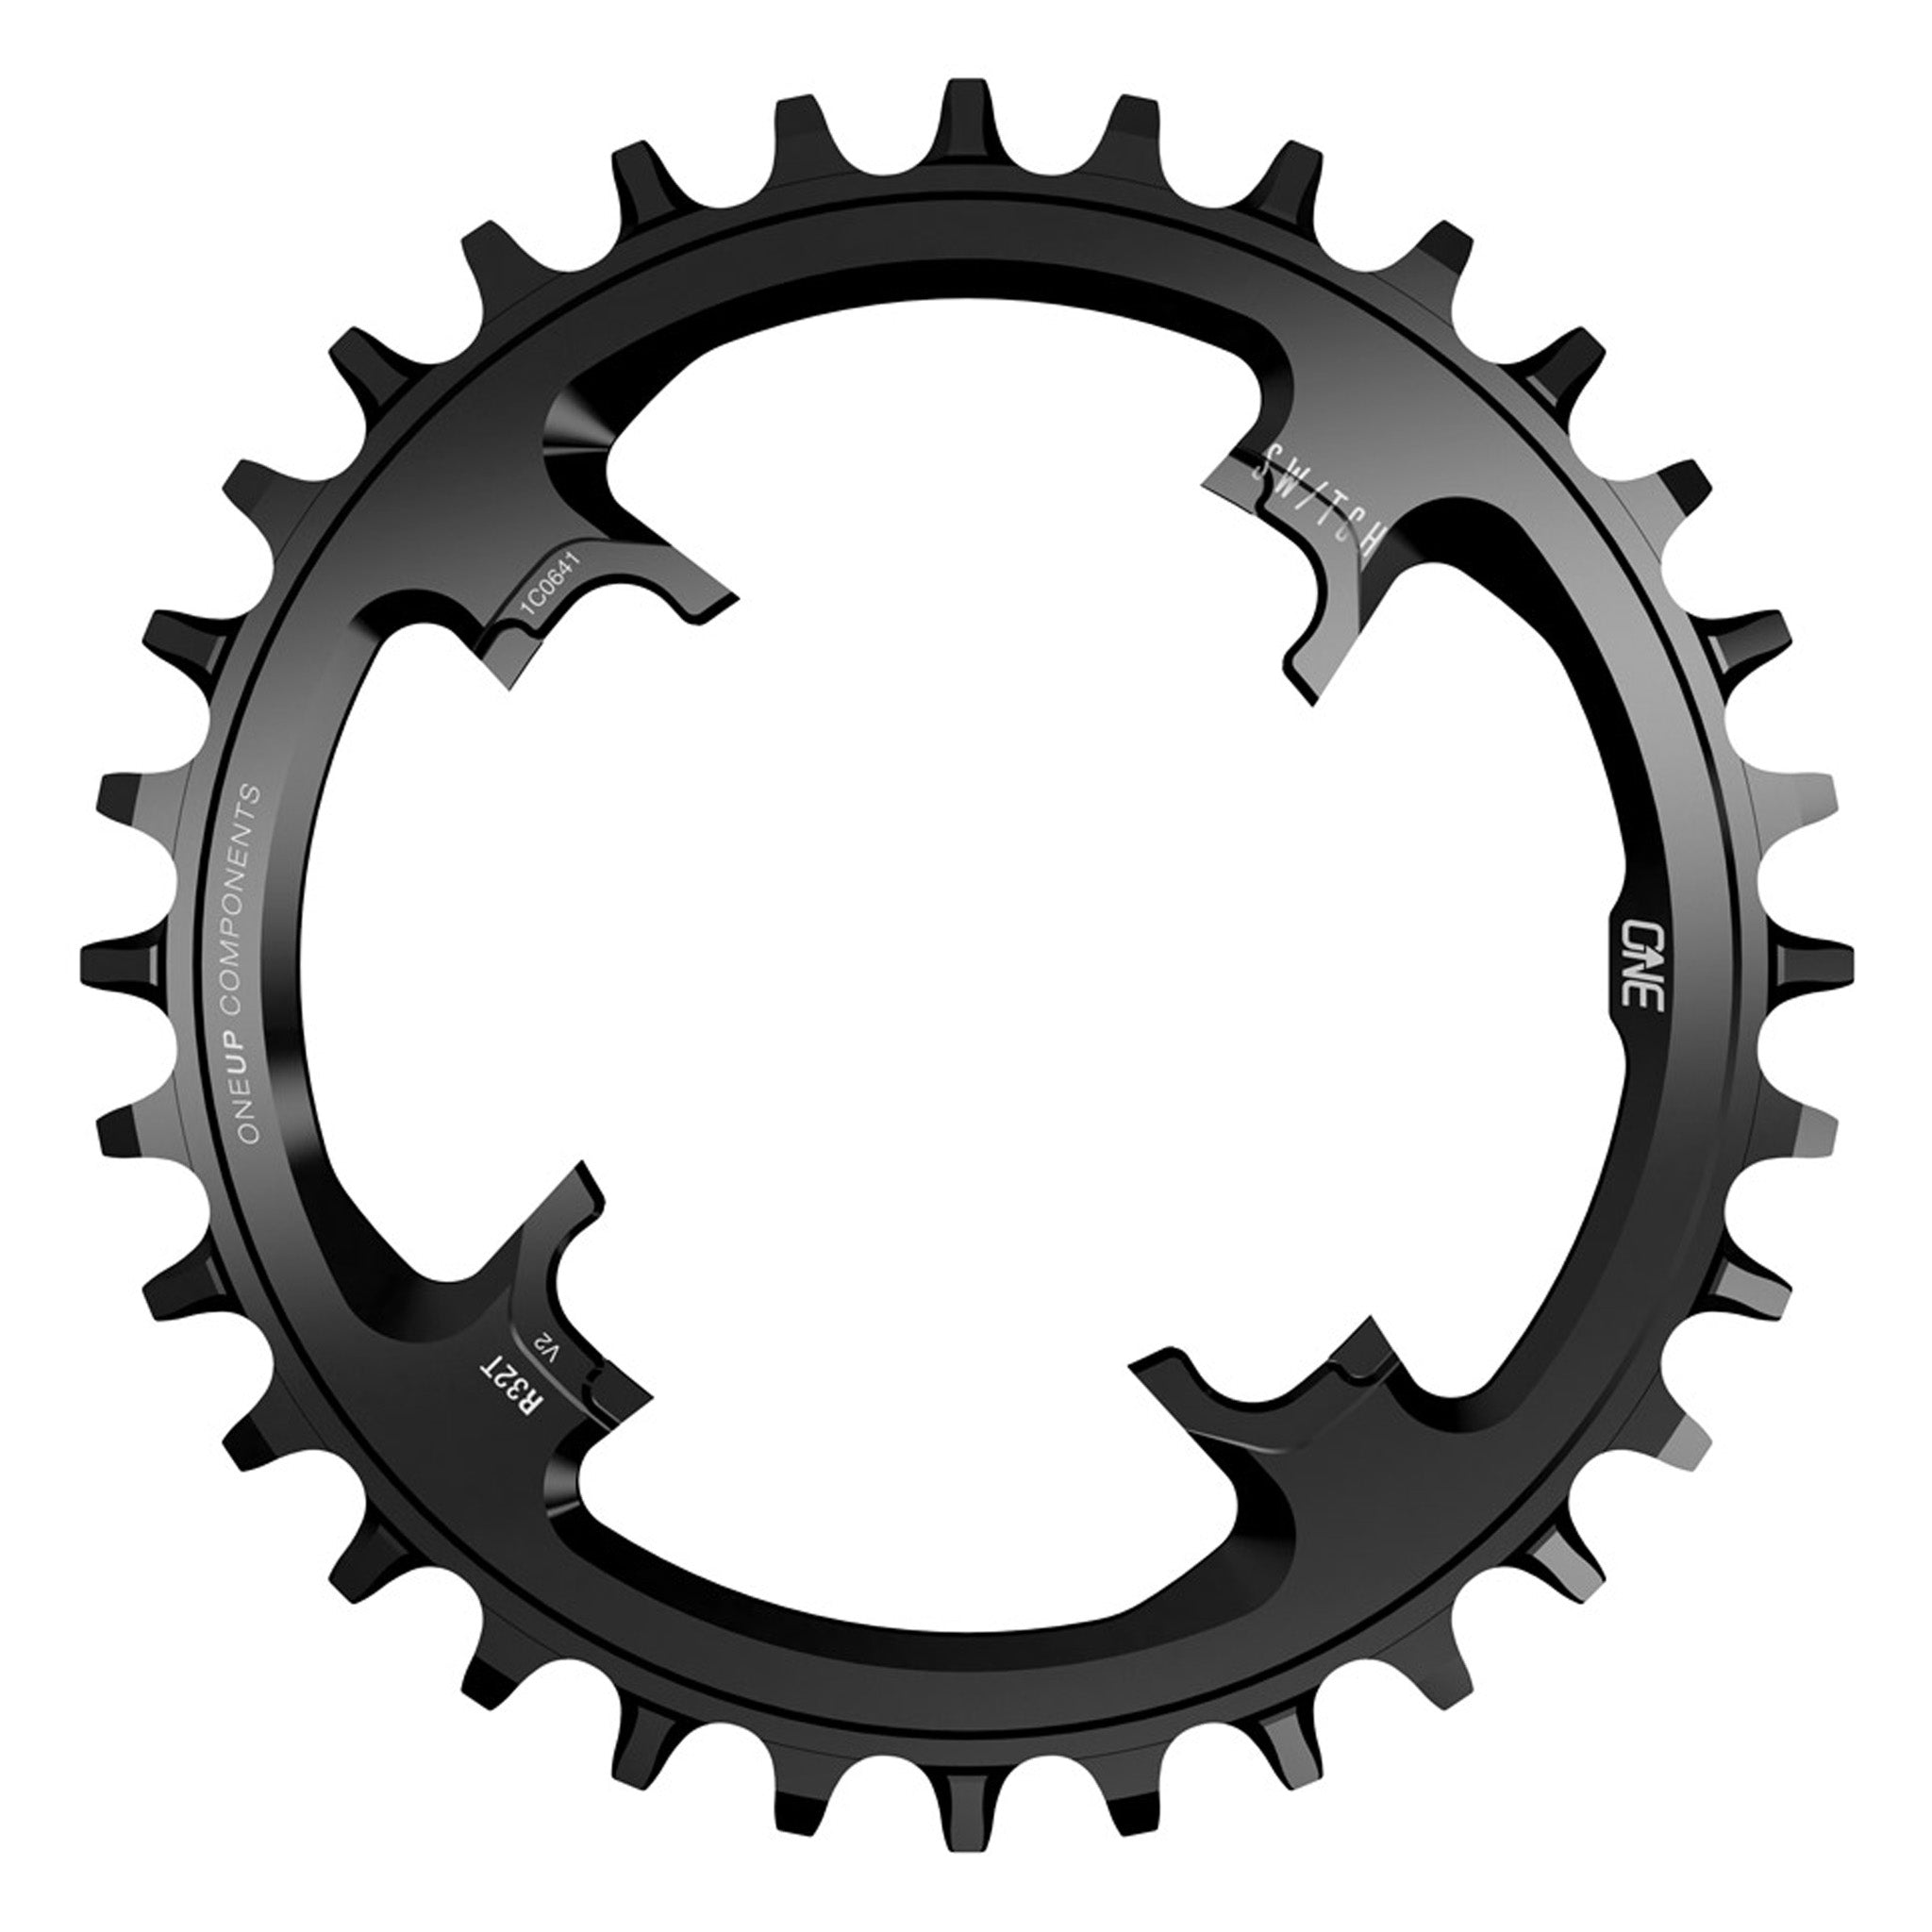 OneUp Components Switch Round V2 12sp Chainring 34t Black